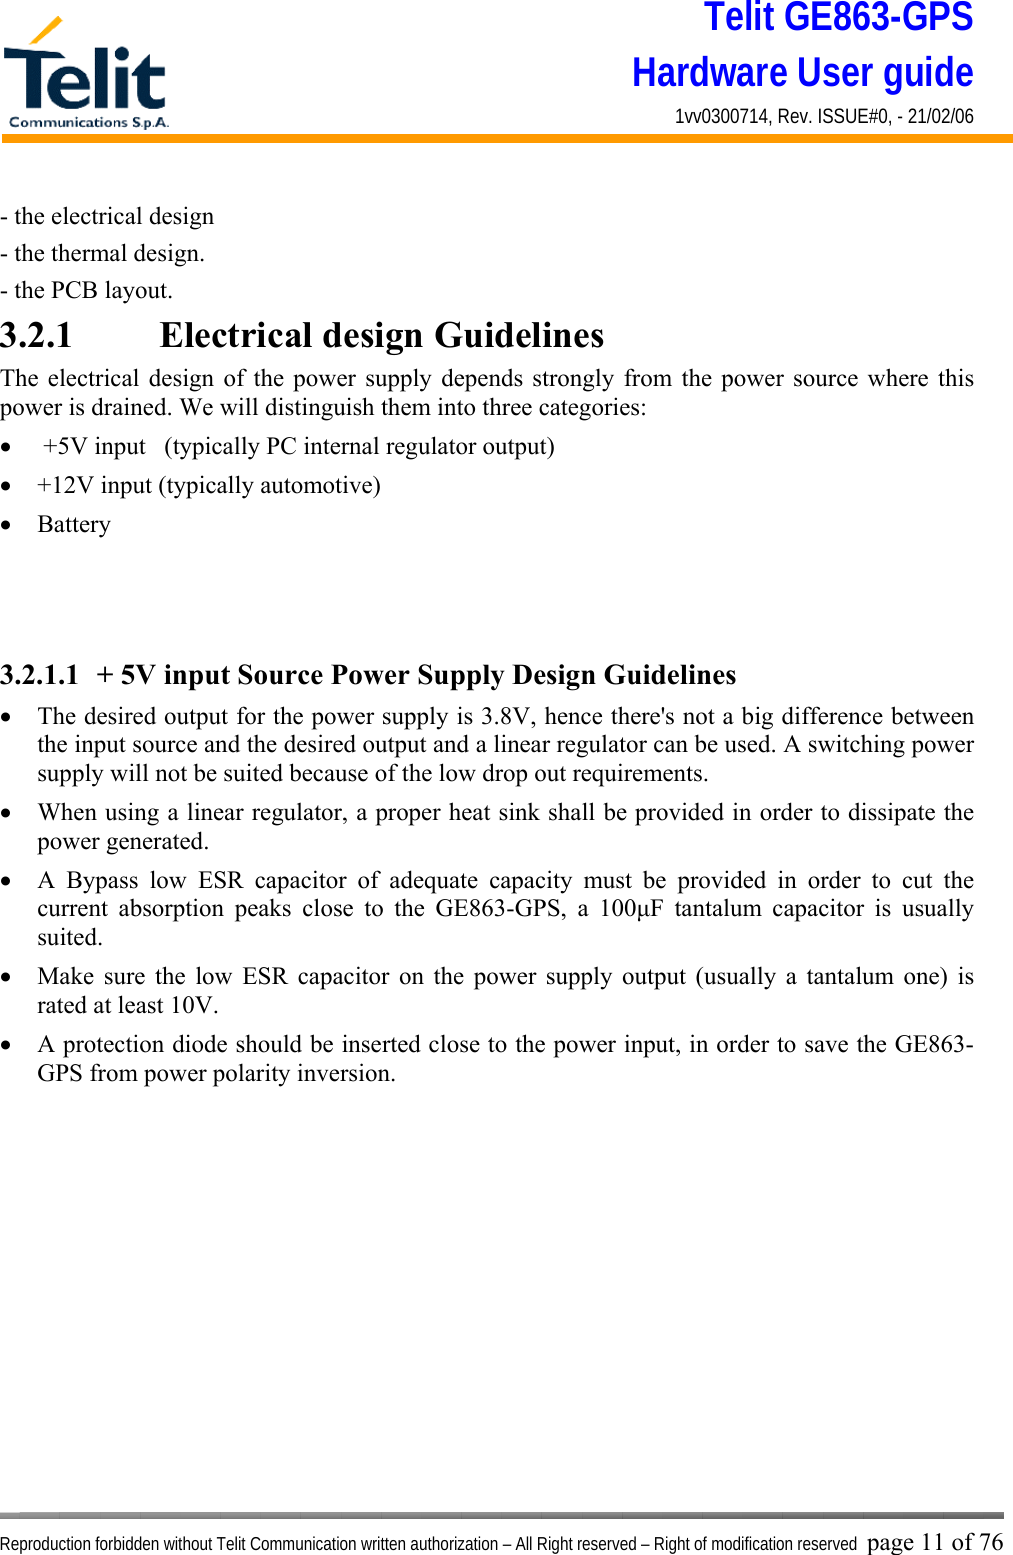 Telit GE863-GPS Hardware User guide 1vv0300714, Rev. ISSUE#0, - 21/02/06    Reproduction forbidden without Telit Communication written authorization – All Right reserved – Right of modification reserved page 11 of 76 - the electrical design - the thermal design. - the PCB layout. 3.2.1    Electrical design Guidelines The electrical design of the power supply depends strongly from the power source where this power is drained. We will distinguish them into three categories: •   +5V input   (typically PC internal regulator output) •  +12V input (typically automotive) •  Battery    3.2.1.1  + 5V input Source Power Supply Design Guidelines •  The desired output for the power supply is 3.8V, hence there&apos;s not a big difference between the input source and the desired output and a linear regulator can be used. A switching power supply will not be suited because of the low drop out requirements. •  When using a linear regulator, a proper heat sink shall be provided in order to dissipate the power generated. •  A Bypass low ESR capacitor of adequate capacity must be provided in order to cut the current absorption peaks close to the GE863-GPS, a 100μF tantalum capacitor is usually suited. •  Make sure the low ESR capacitor on the power supply output (usually a tantalum one) is rated at least 10V. •  A protection diode should be inserted close to the power input, in order to save the GE863-GPS from power polarity inversion. 